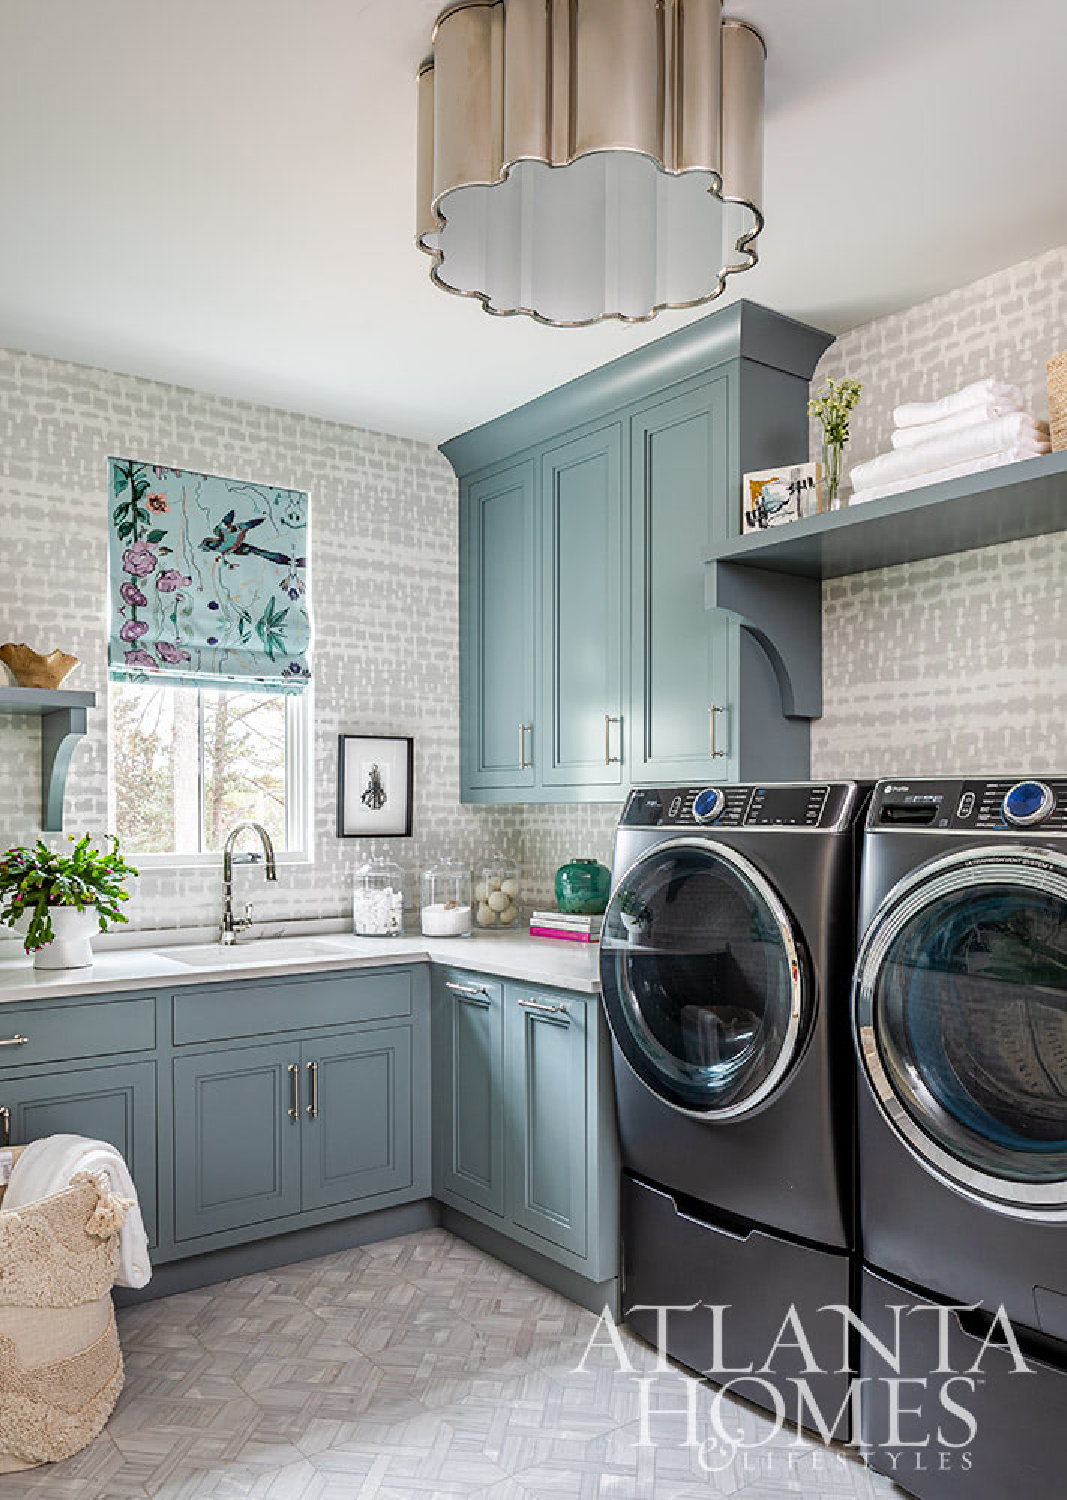 Crystal Corder Interiors designed upstairs laundry with blue cabinetry (Kingdom Woodworks), wallpaper (Phillip Jeffries), and fine art by Holly Irwin (dk Gallery) - AH&L.